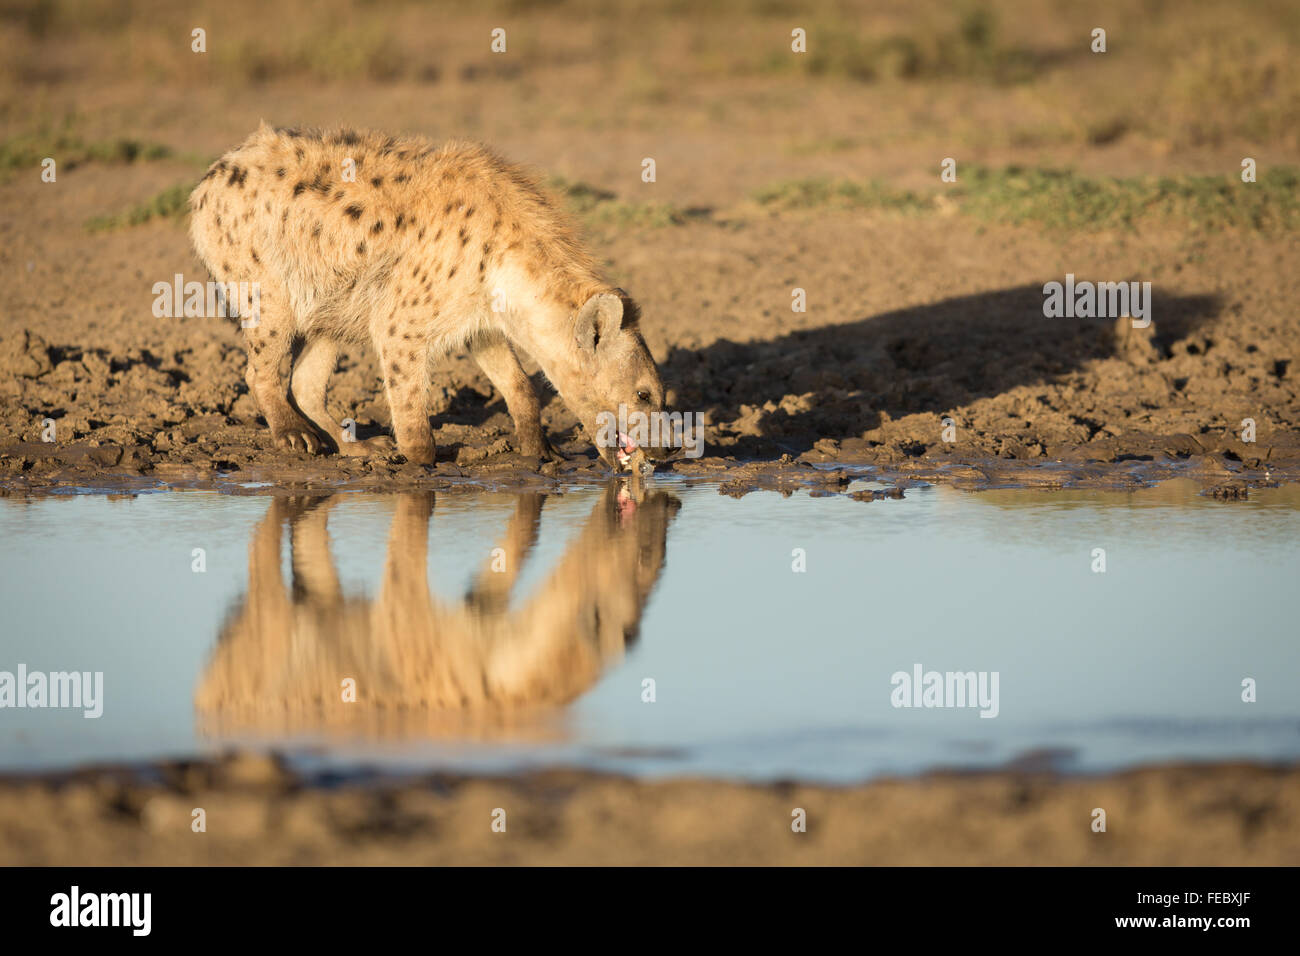 African Spotted Hyaena drinking in the Serengeti National Park Tanzania Stock Photo